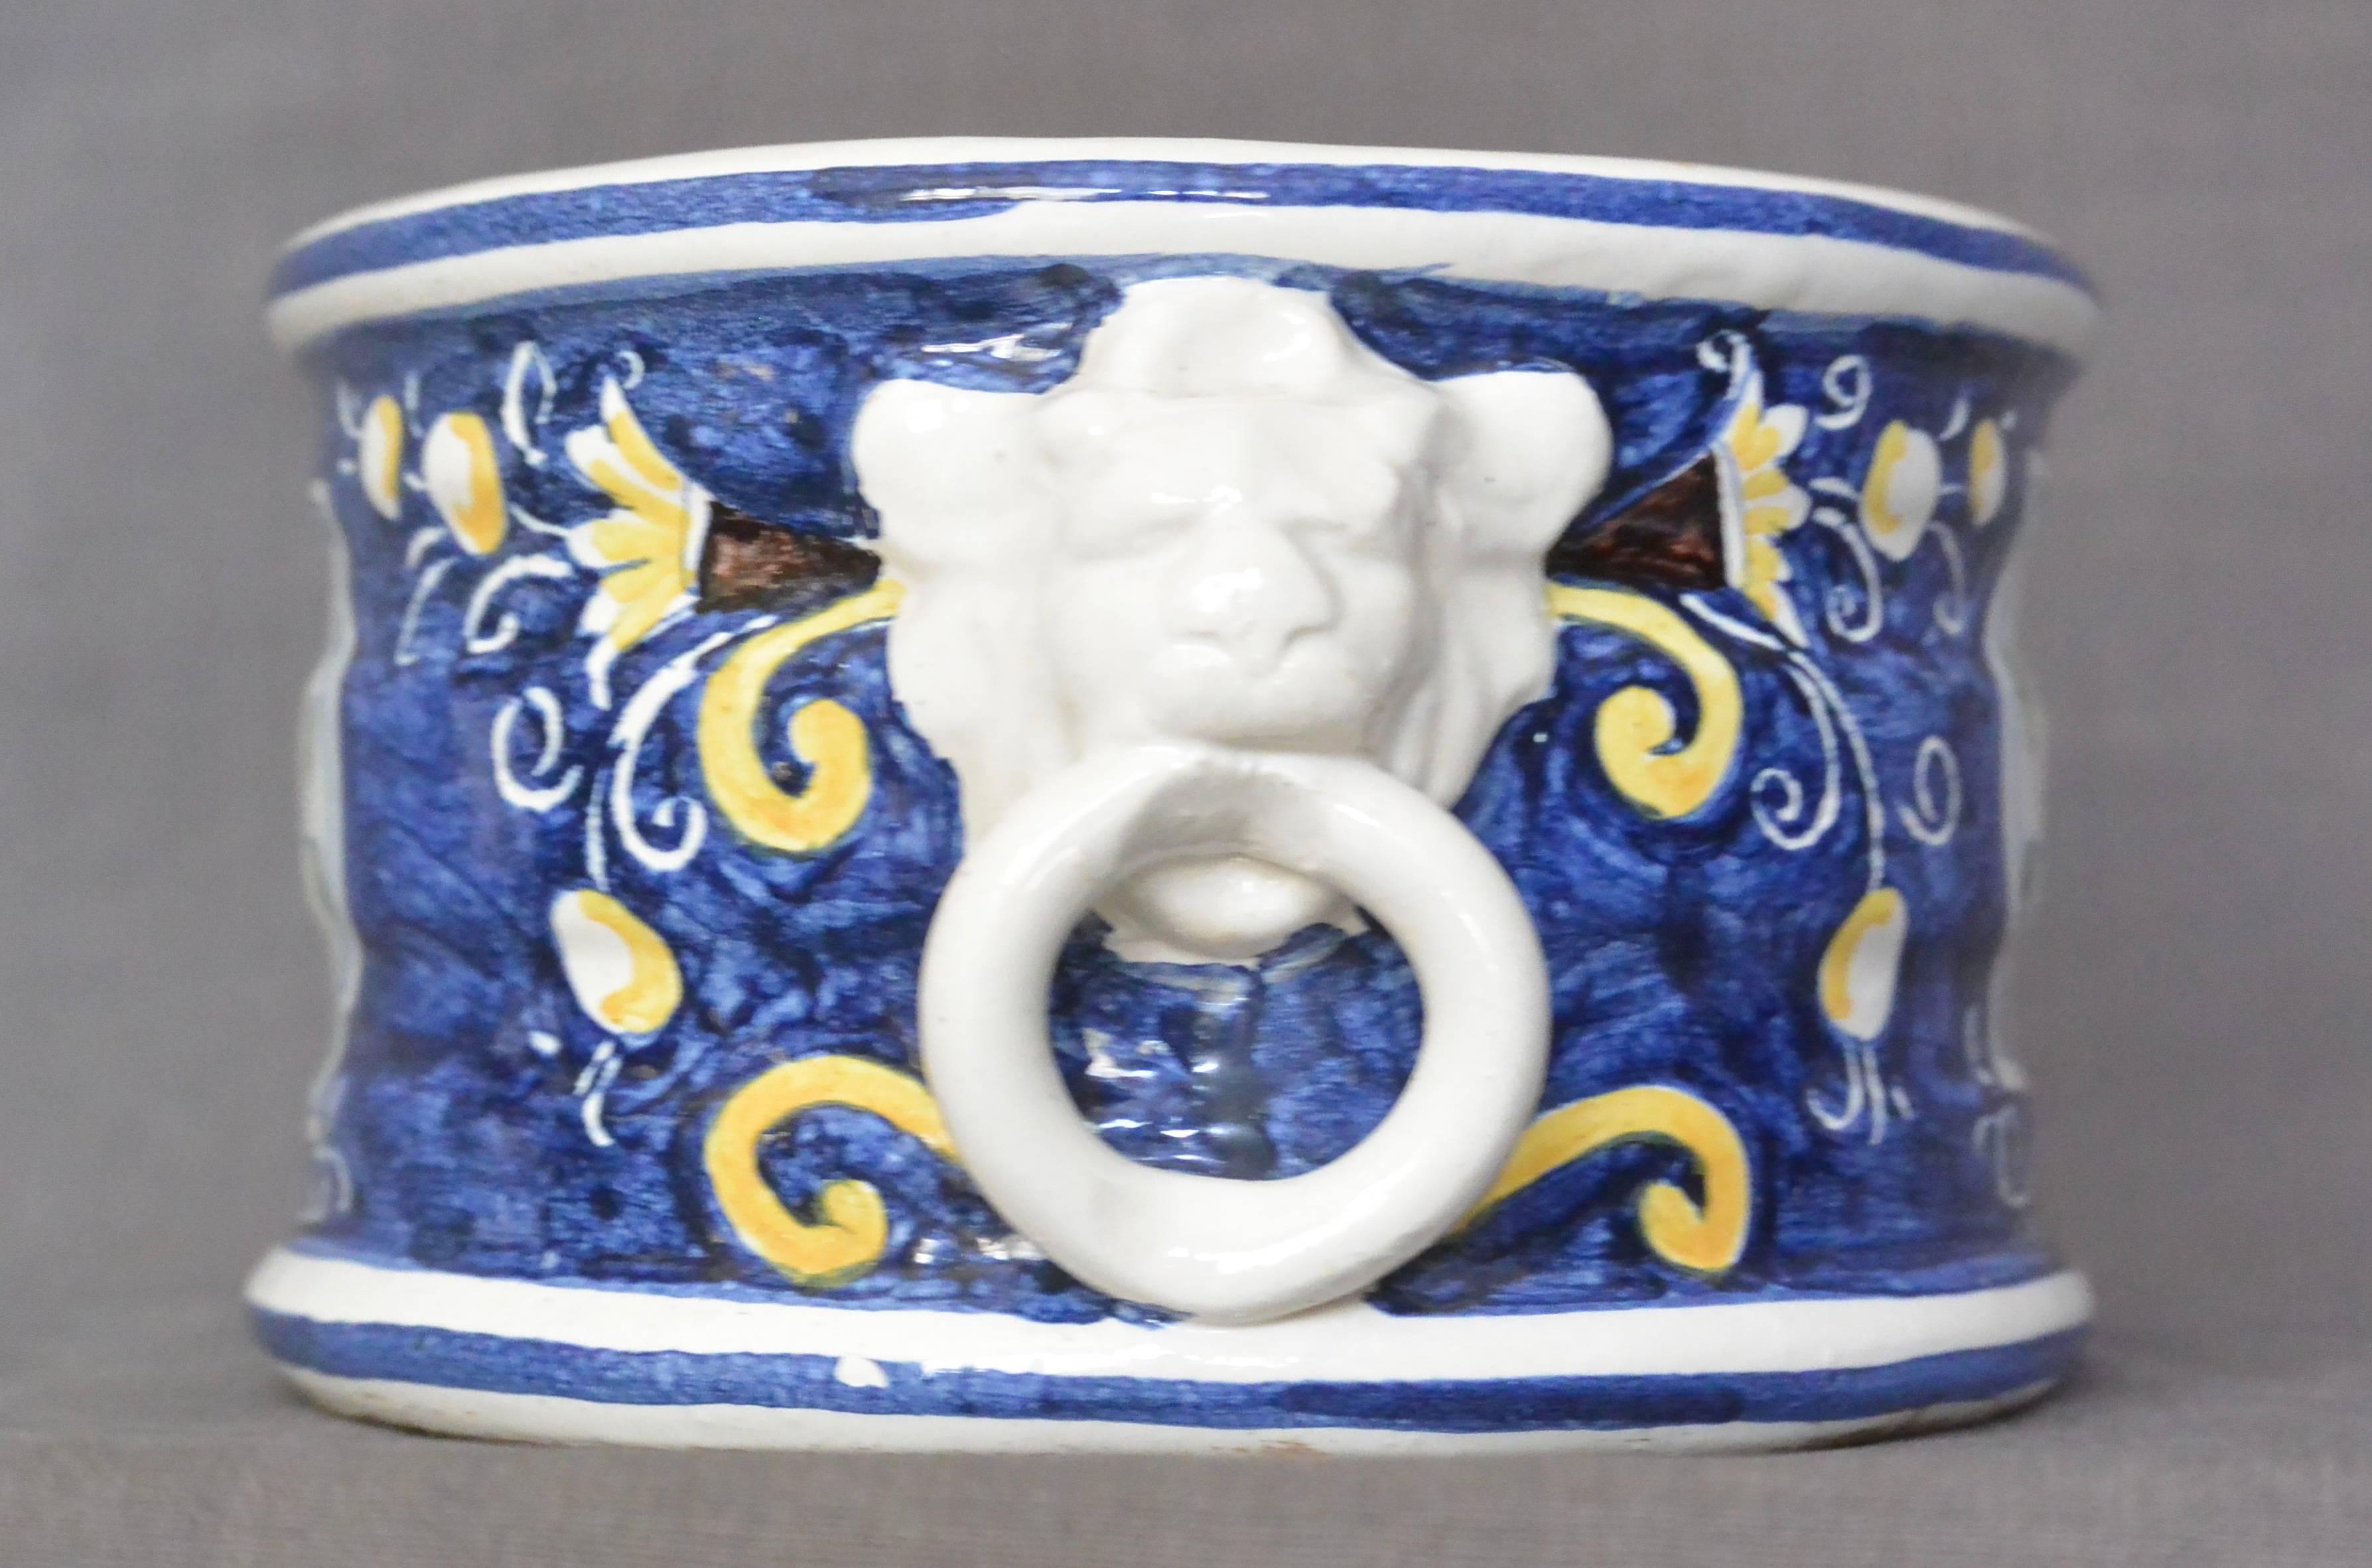 Vintage blue and white Italian cachepot, of ovoid form with lion mask ring handles and hand-painted flowers and lemons on a blue field with a central shield with floral basket Italy, mid-20th century.
Dimensions: 10.5